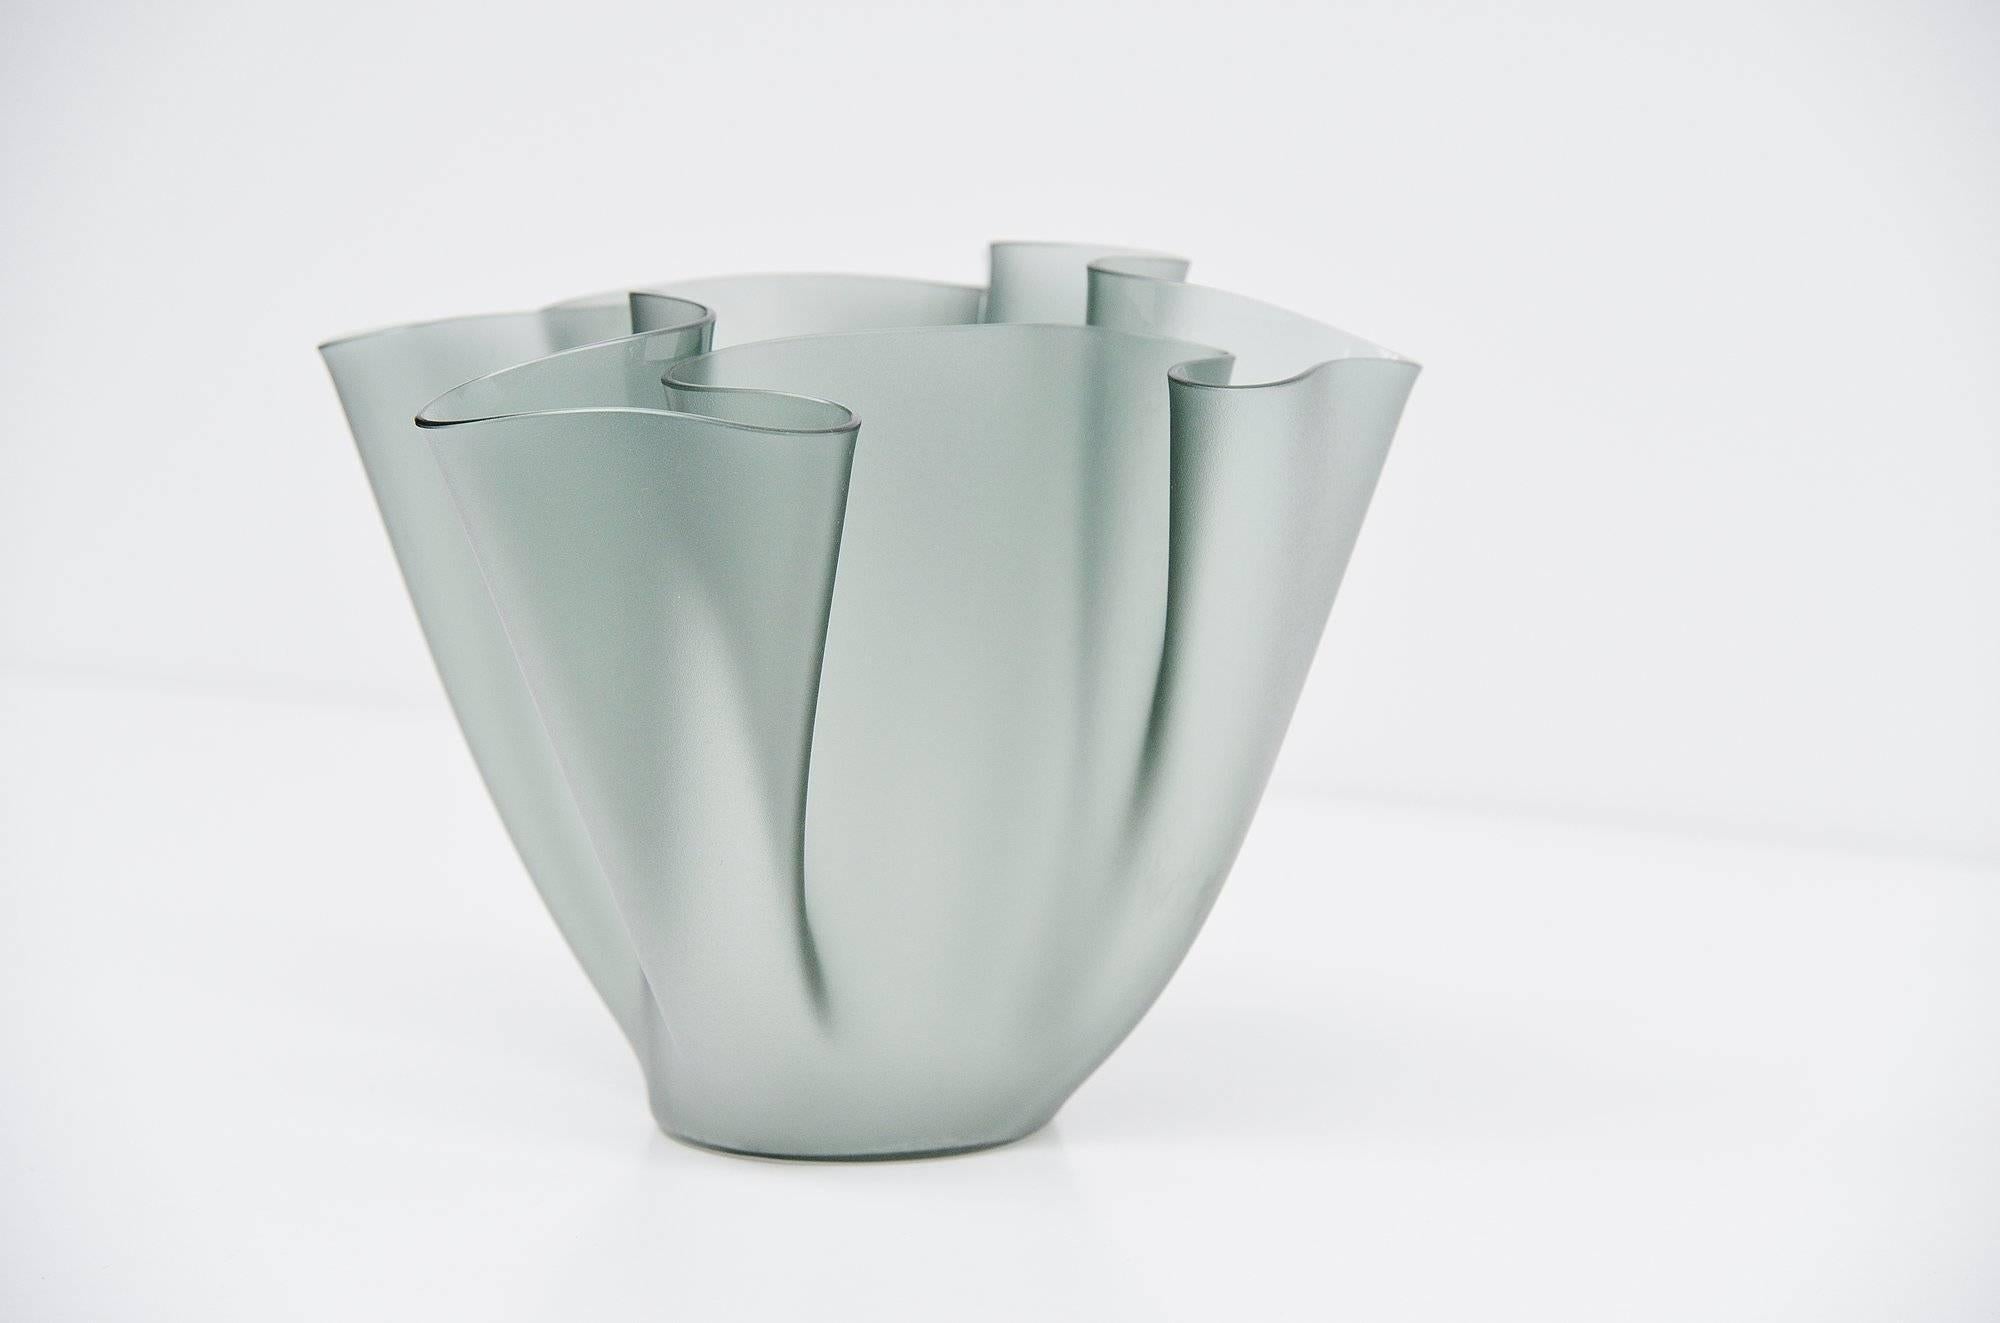 Rare and decorative vase designed by Pietro Chiesa in 1932 and manufactured by Fontana Arte until the 1970s. This beautiful old vase is made of grey frosted glass and has a very nice ‘Cartoccio’ (paper bag) shape. Since the manufacturing process of